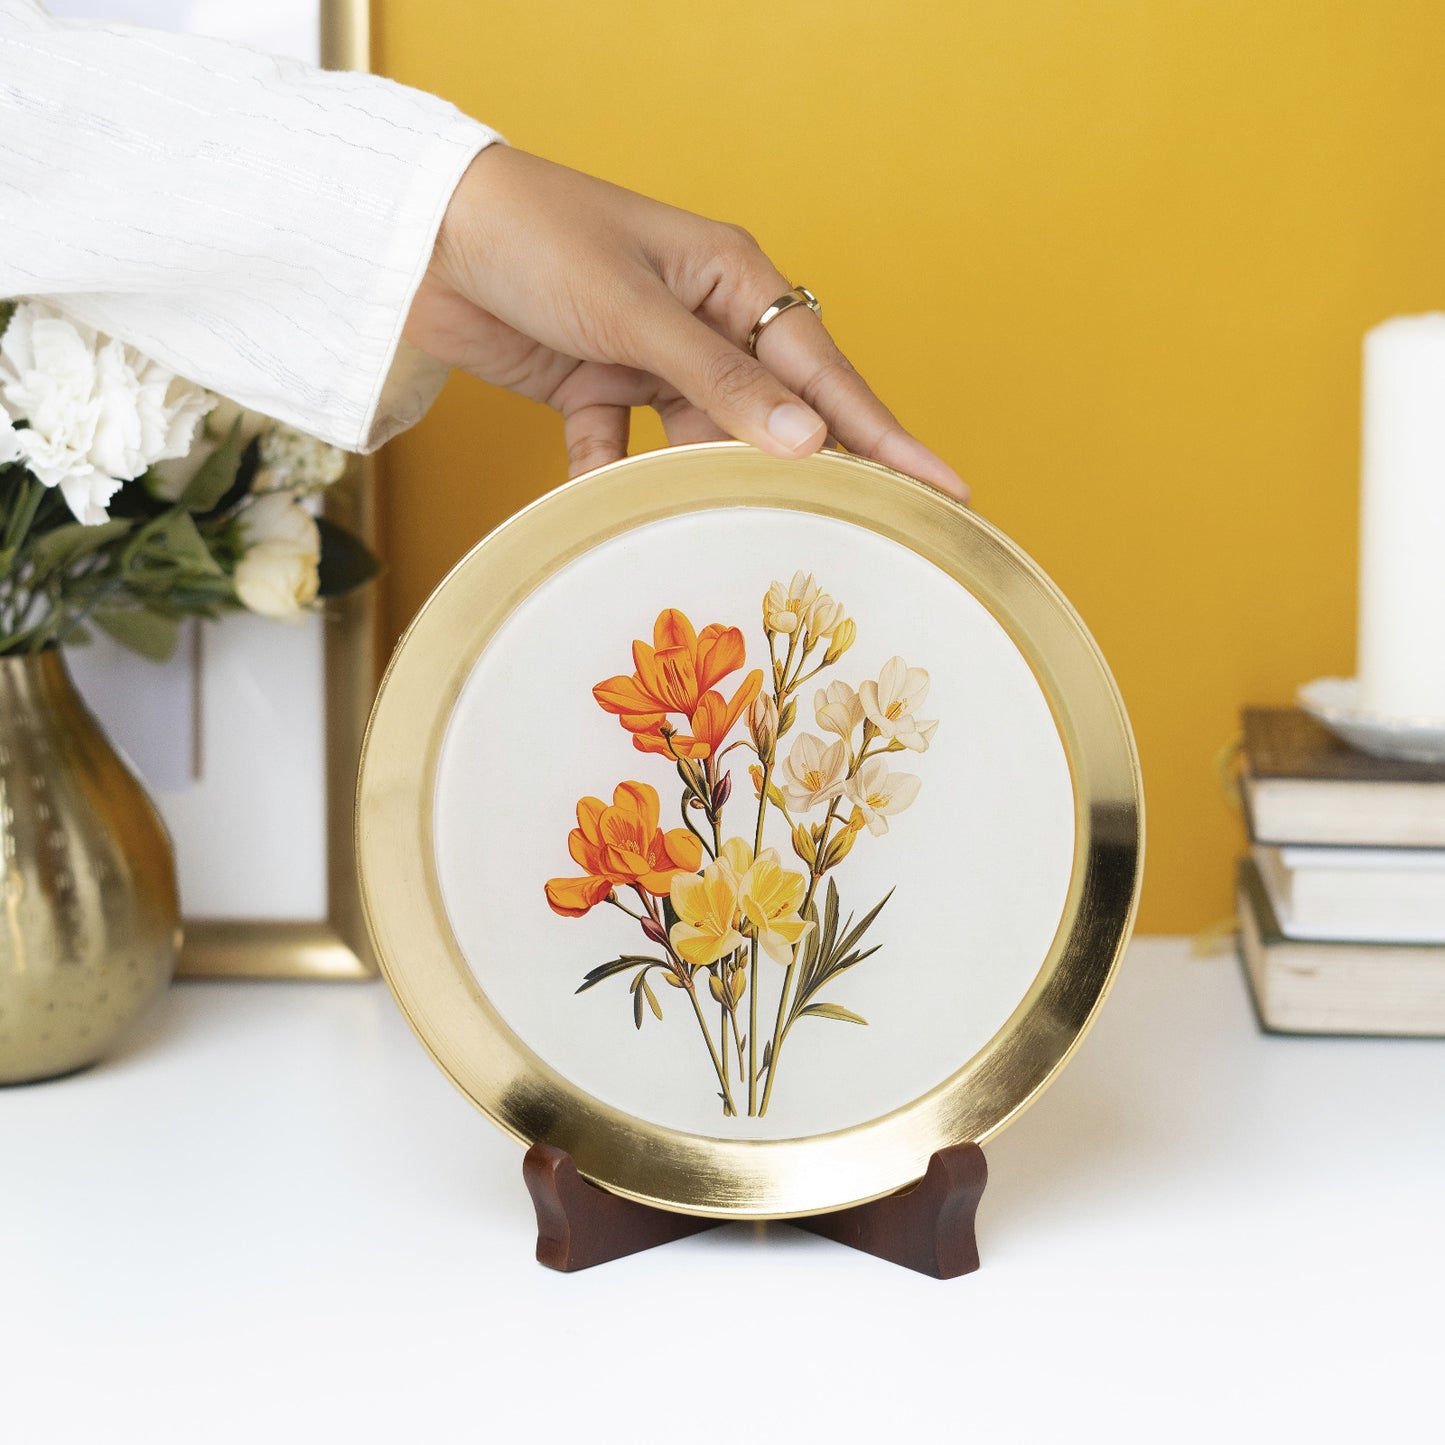 Gold Rim Botanical Decor Plate with wooden stand